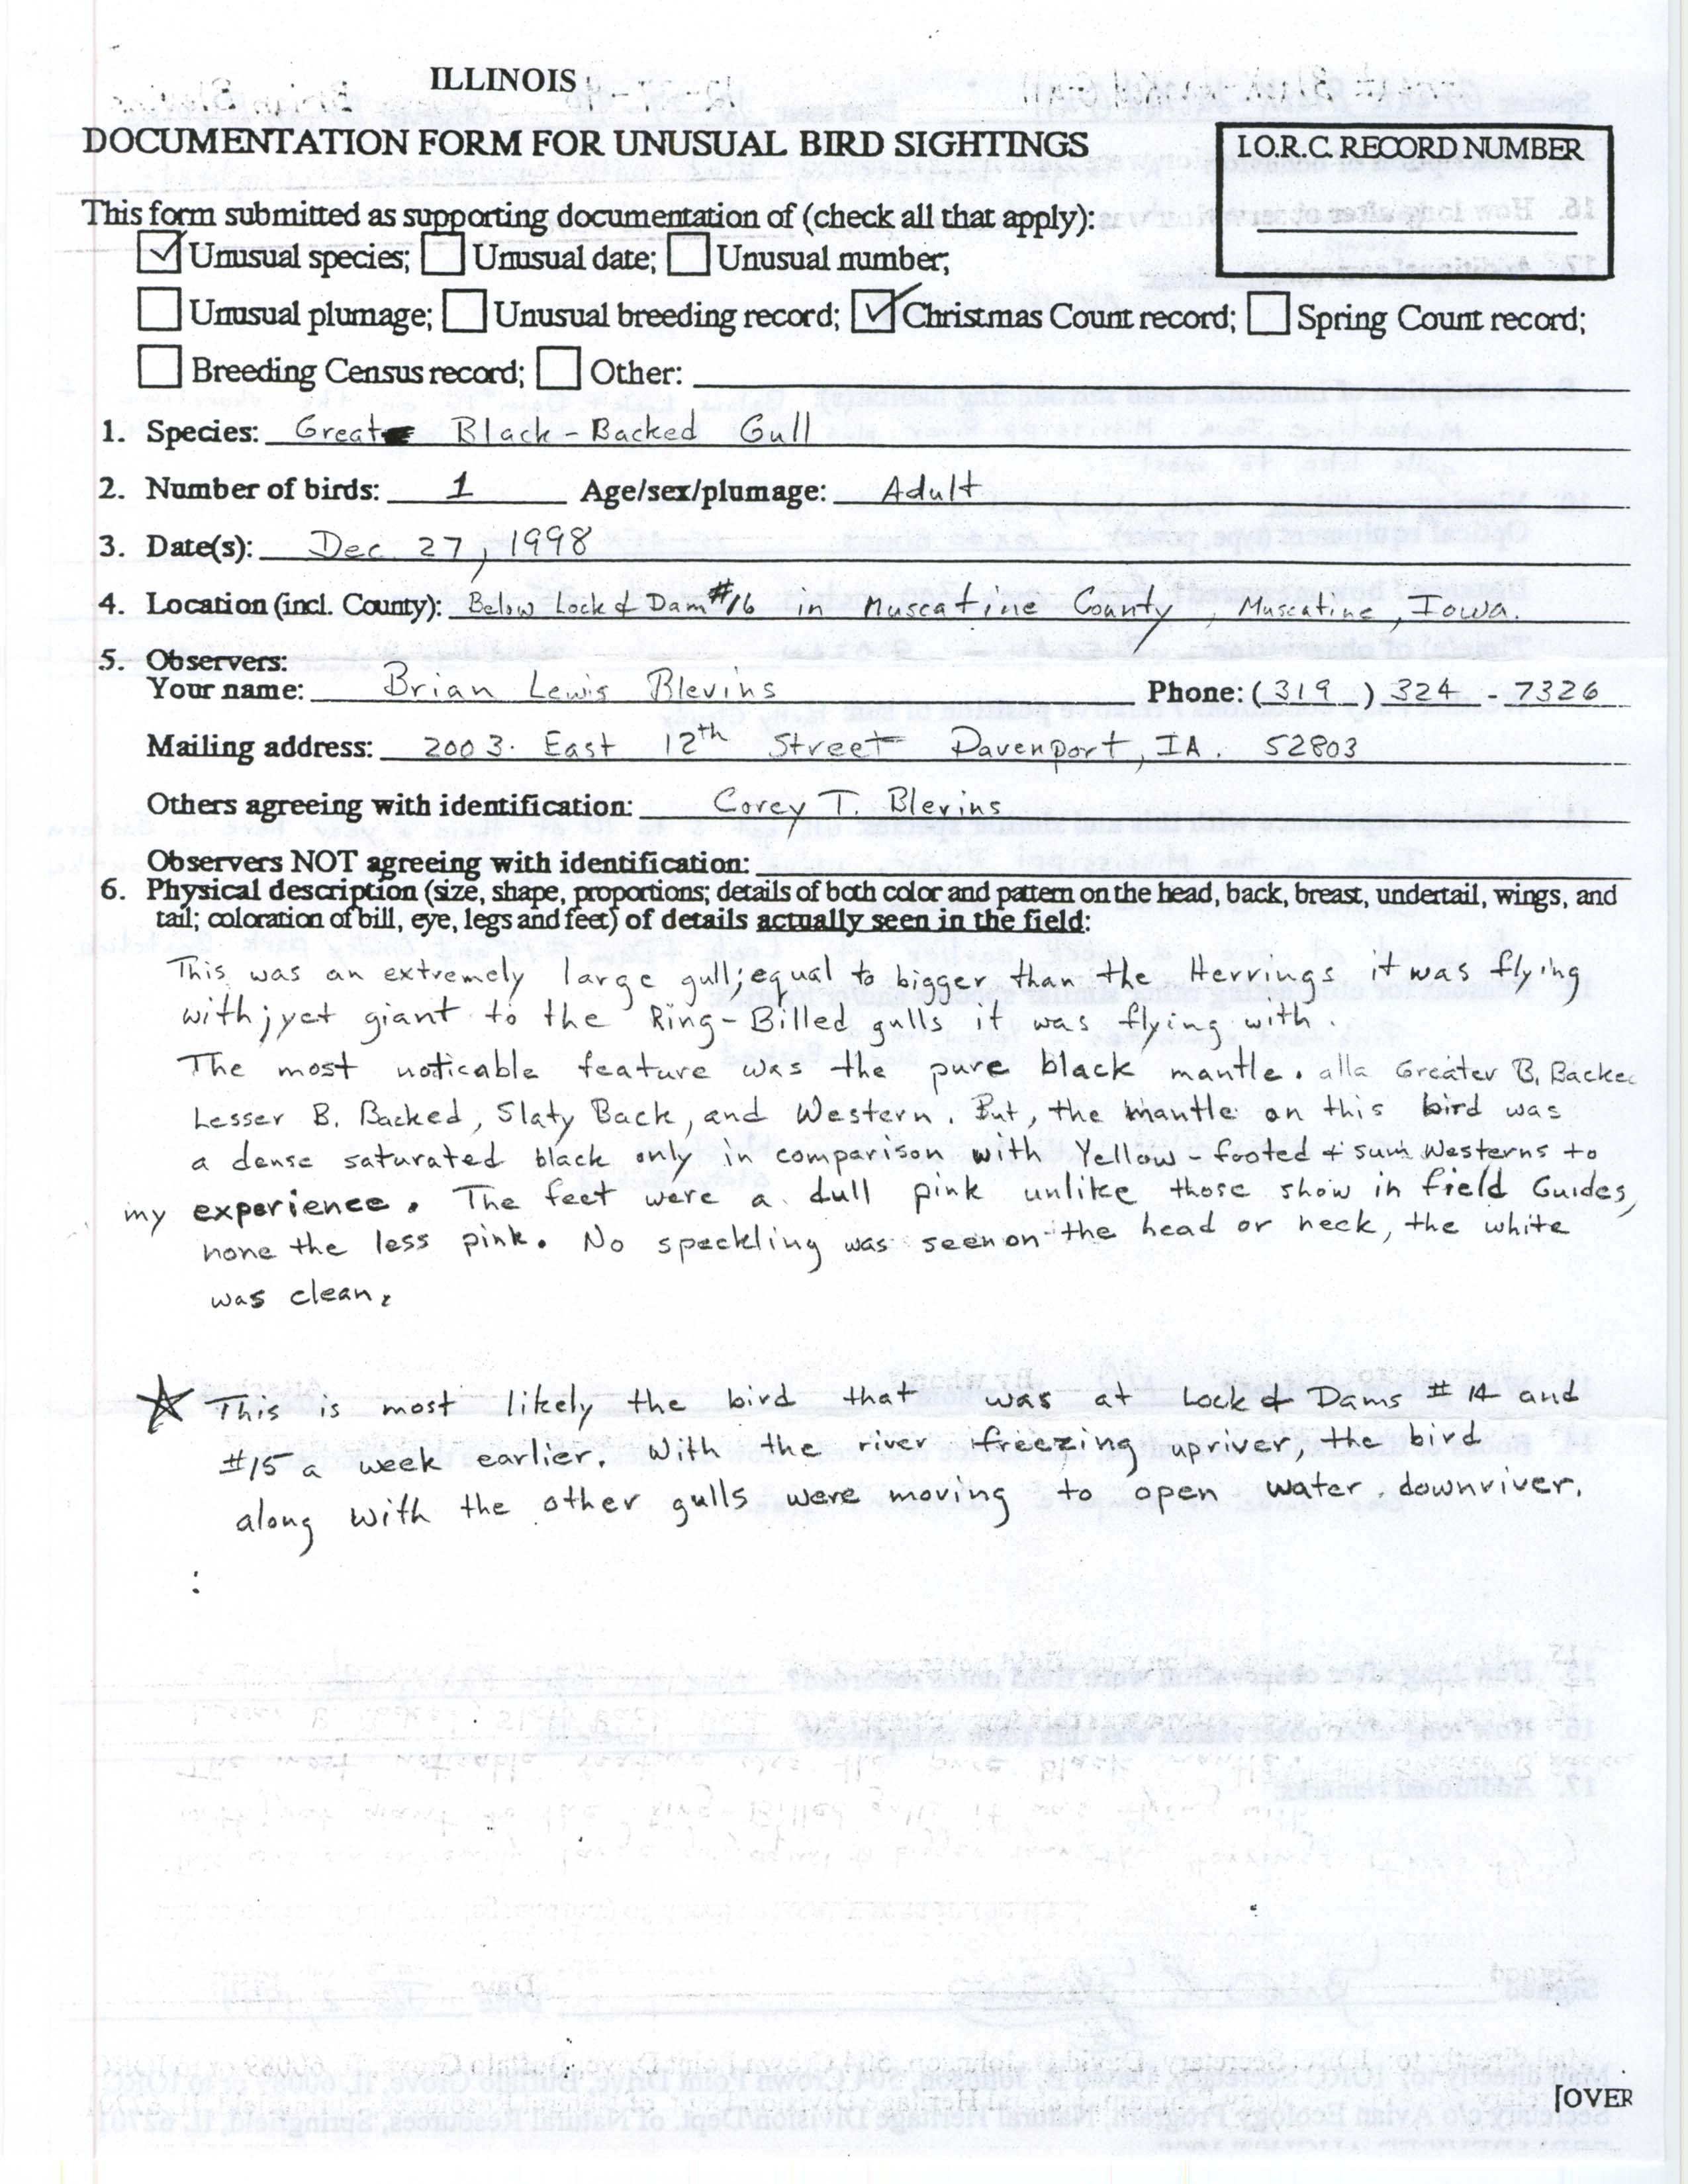 Rare bird documentation form for Great Black-backed Gull at Lock and Dam 16, 1998